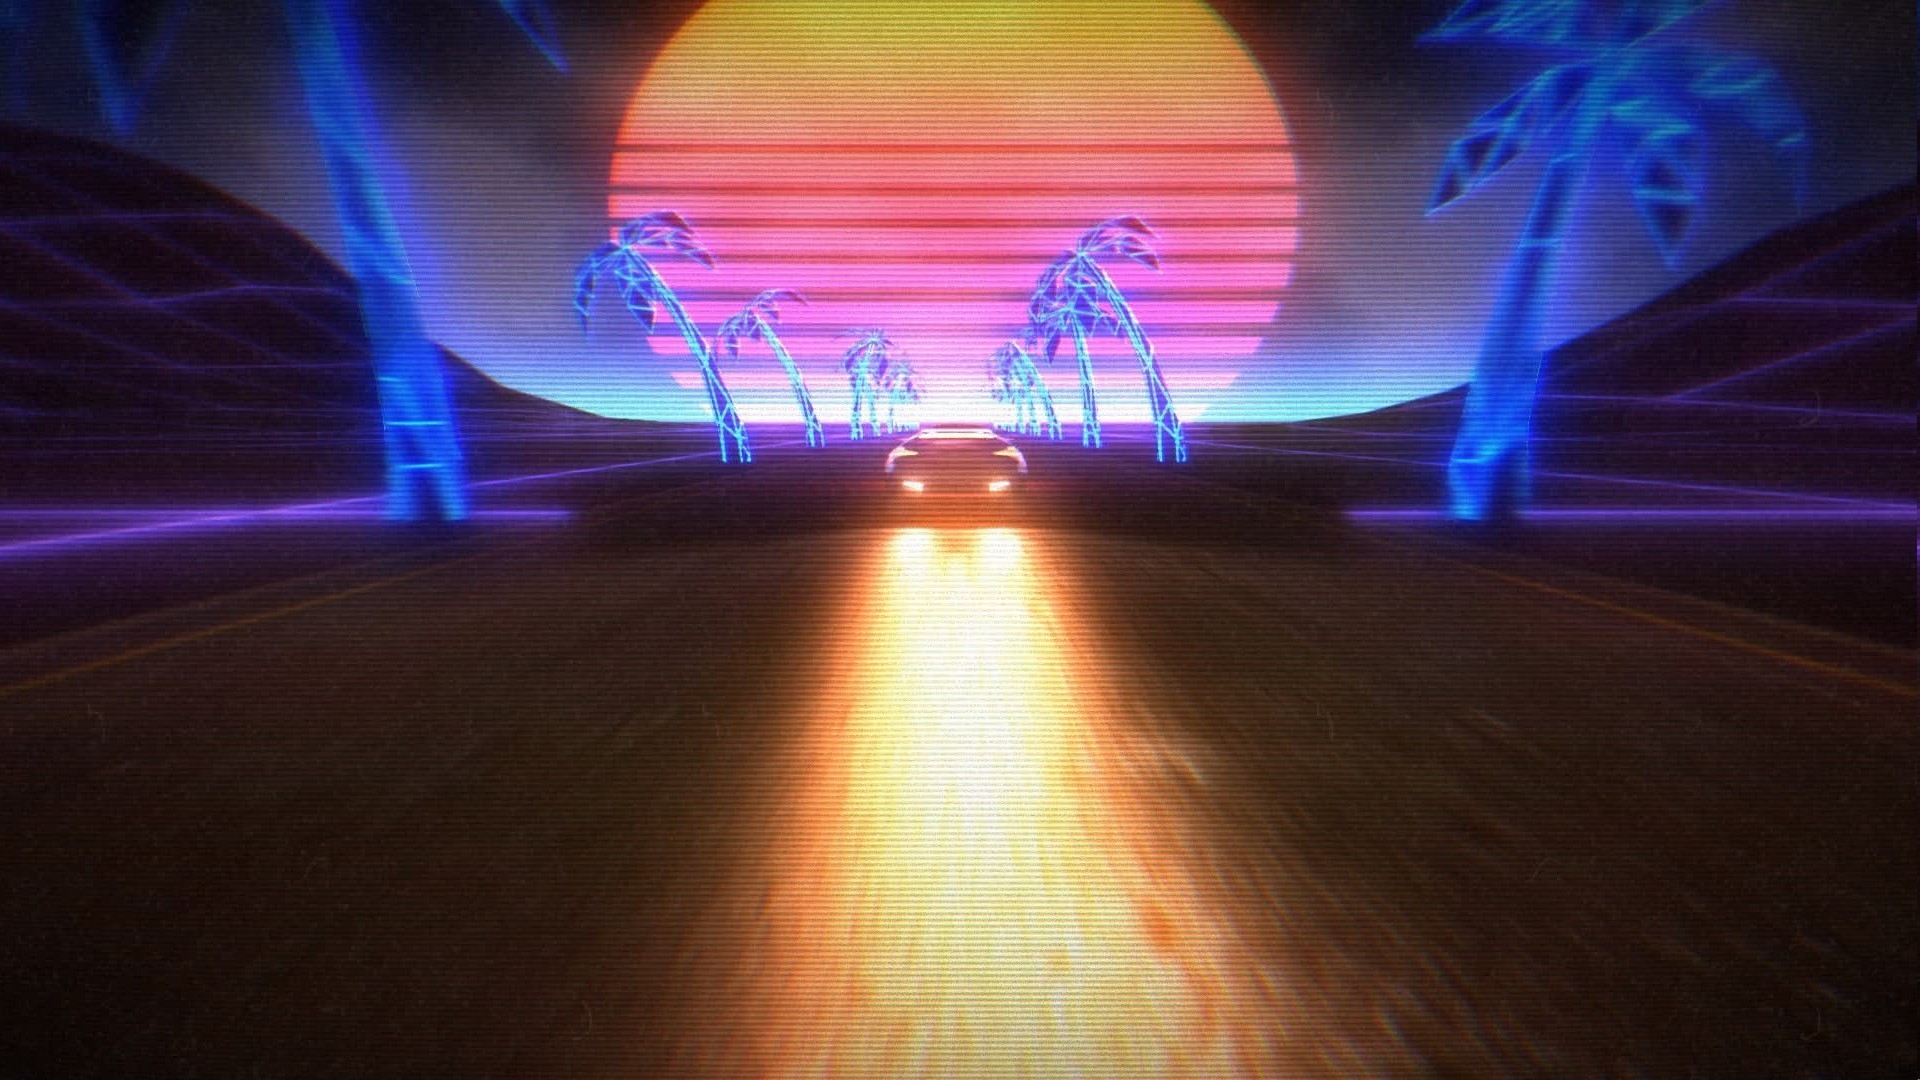 New Retro Wave, Synthwave, 1980s, Neon, Car, Retro Games Wallpapers HD /  Desktop and Mobile Backgrounds